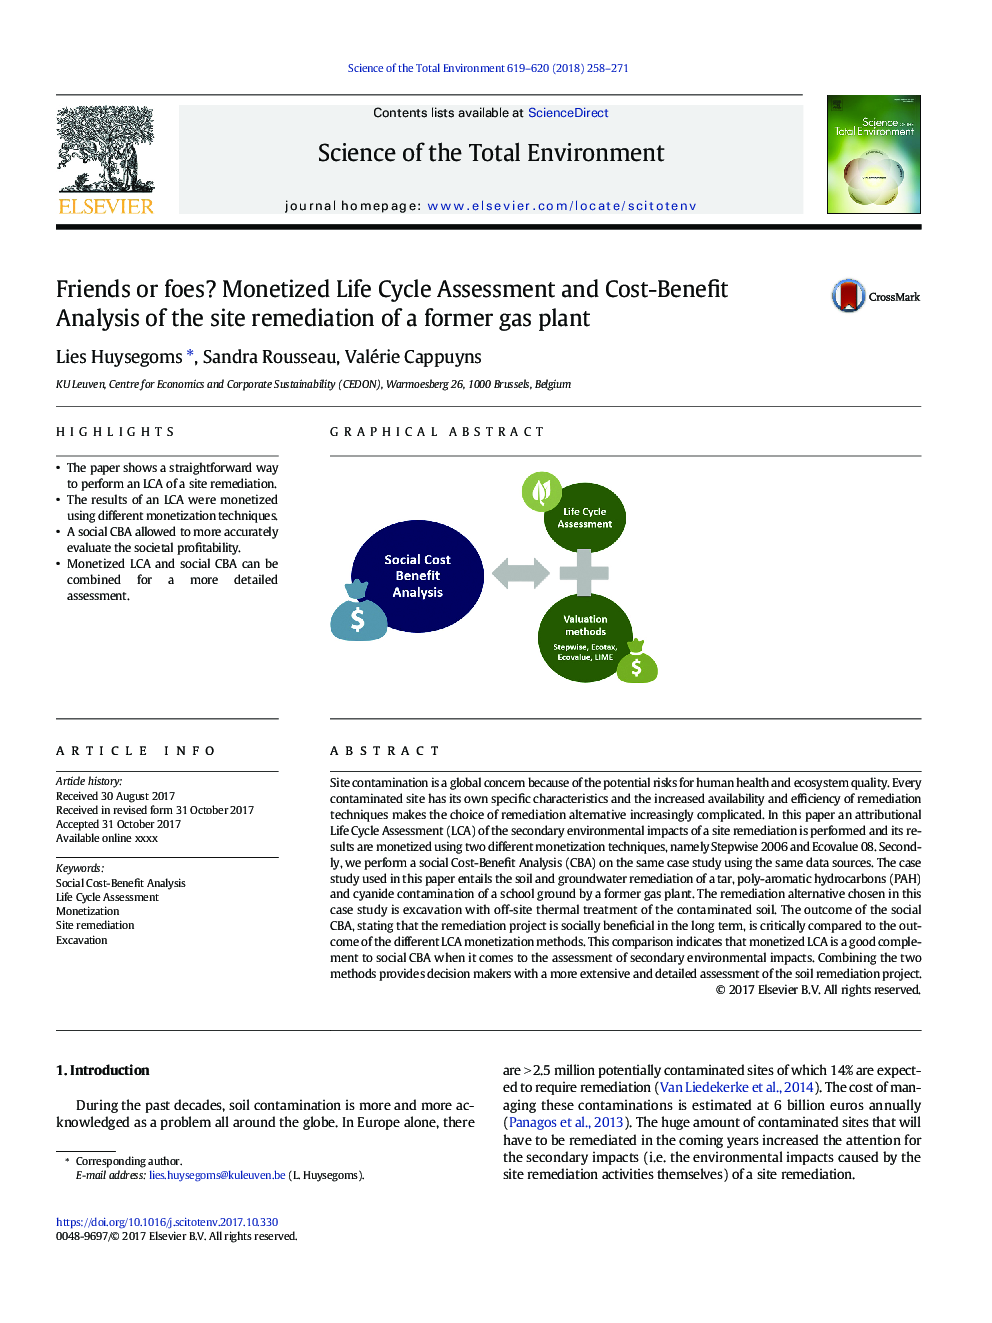 Friends or foes? Monetized Life Cycle Assessment and Cost-Benefit Analysis of the site remediation of a former gas plant